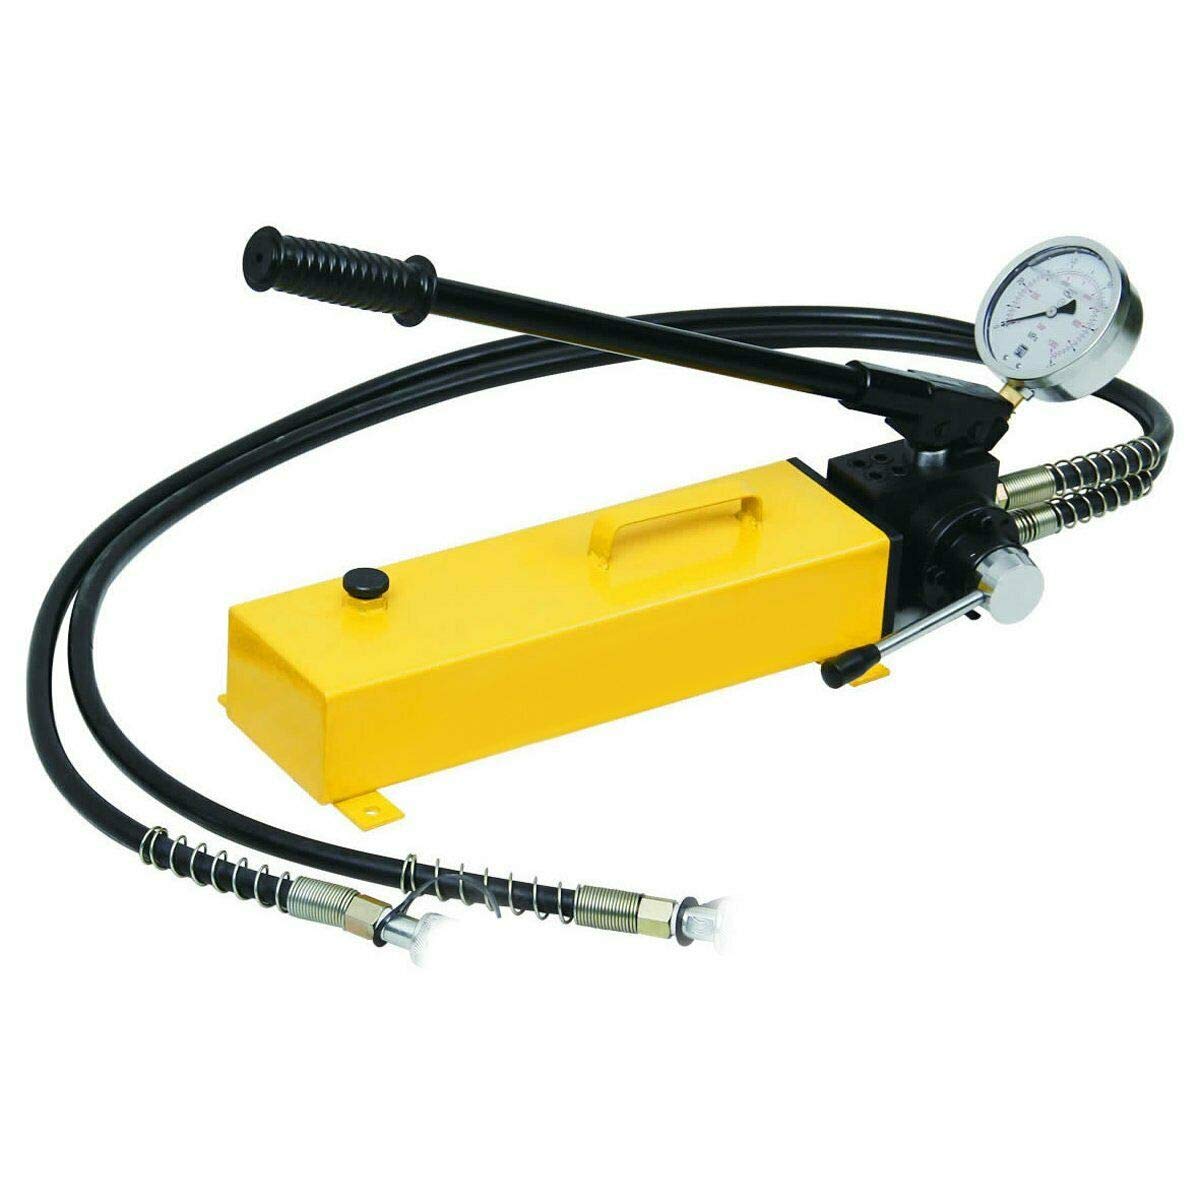 CP-700AB Double Acting Hydraulic Hand Pump w/ Pressure Gauge - Click Image to Close